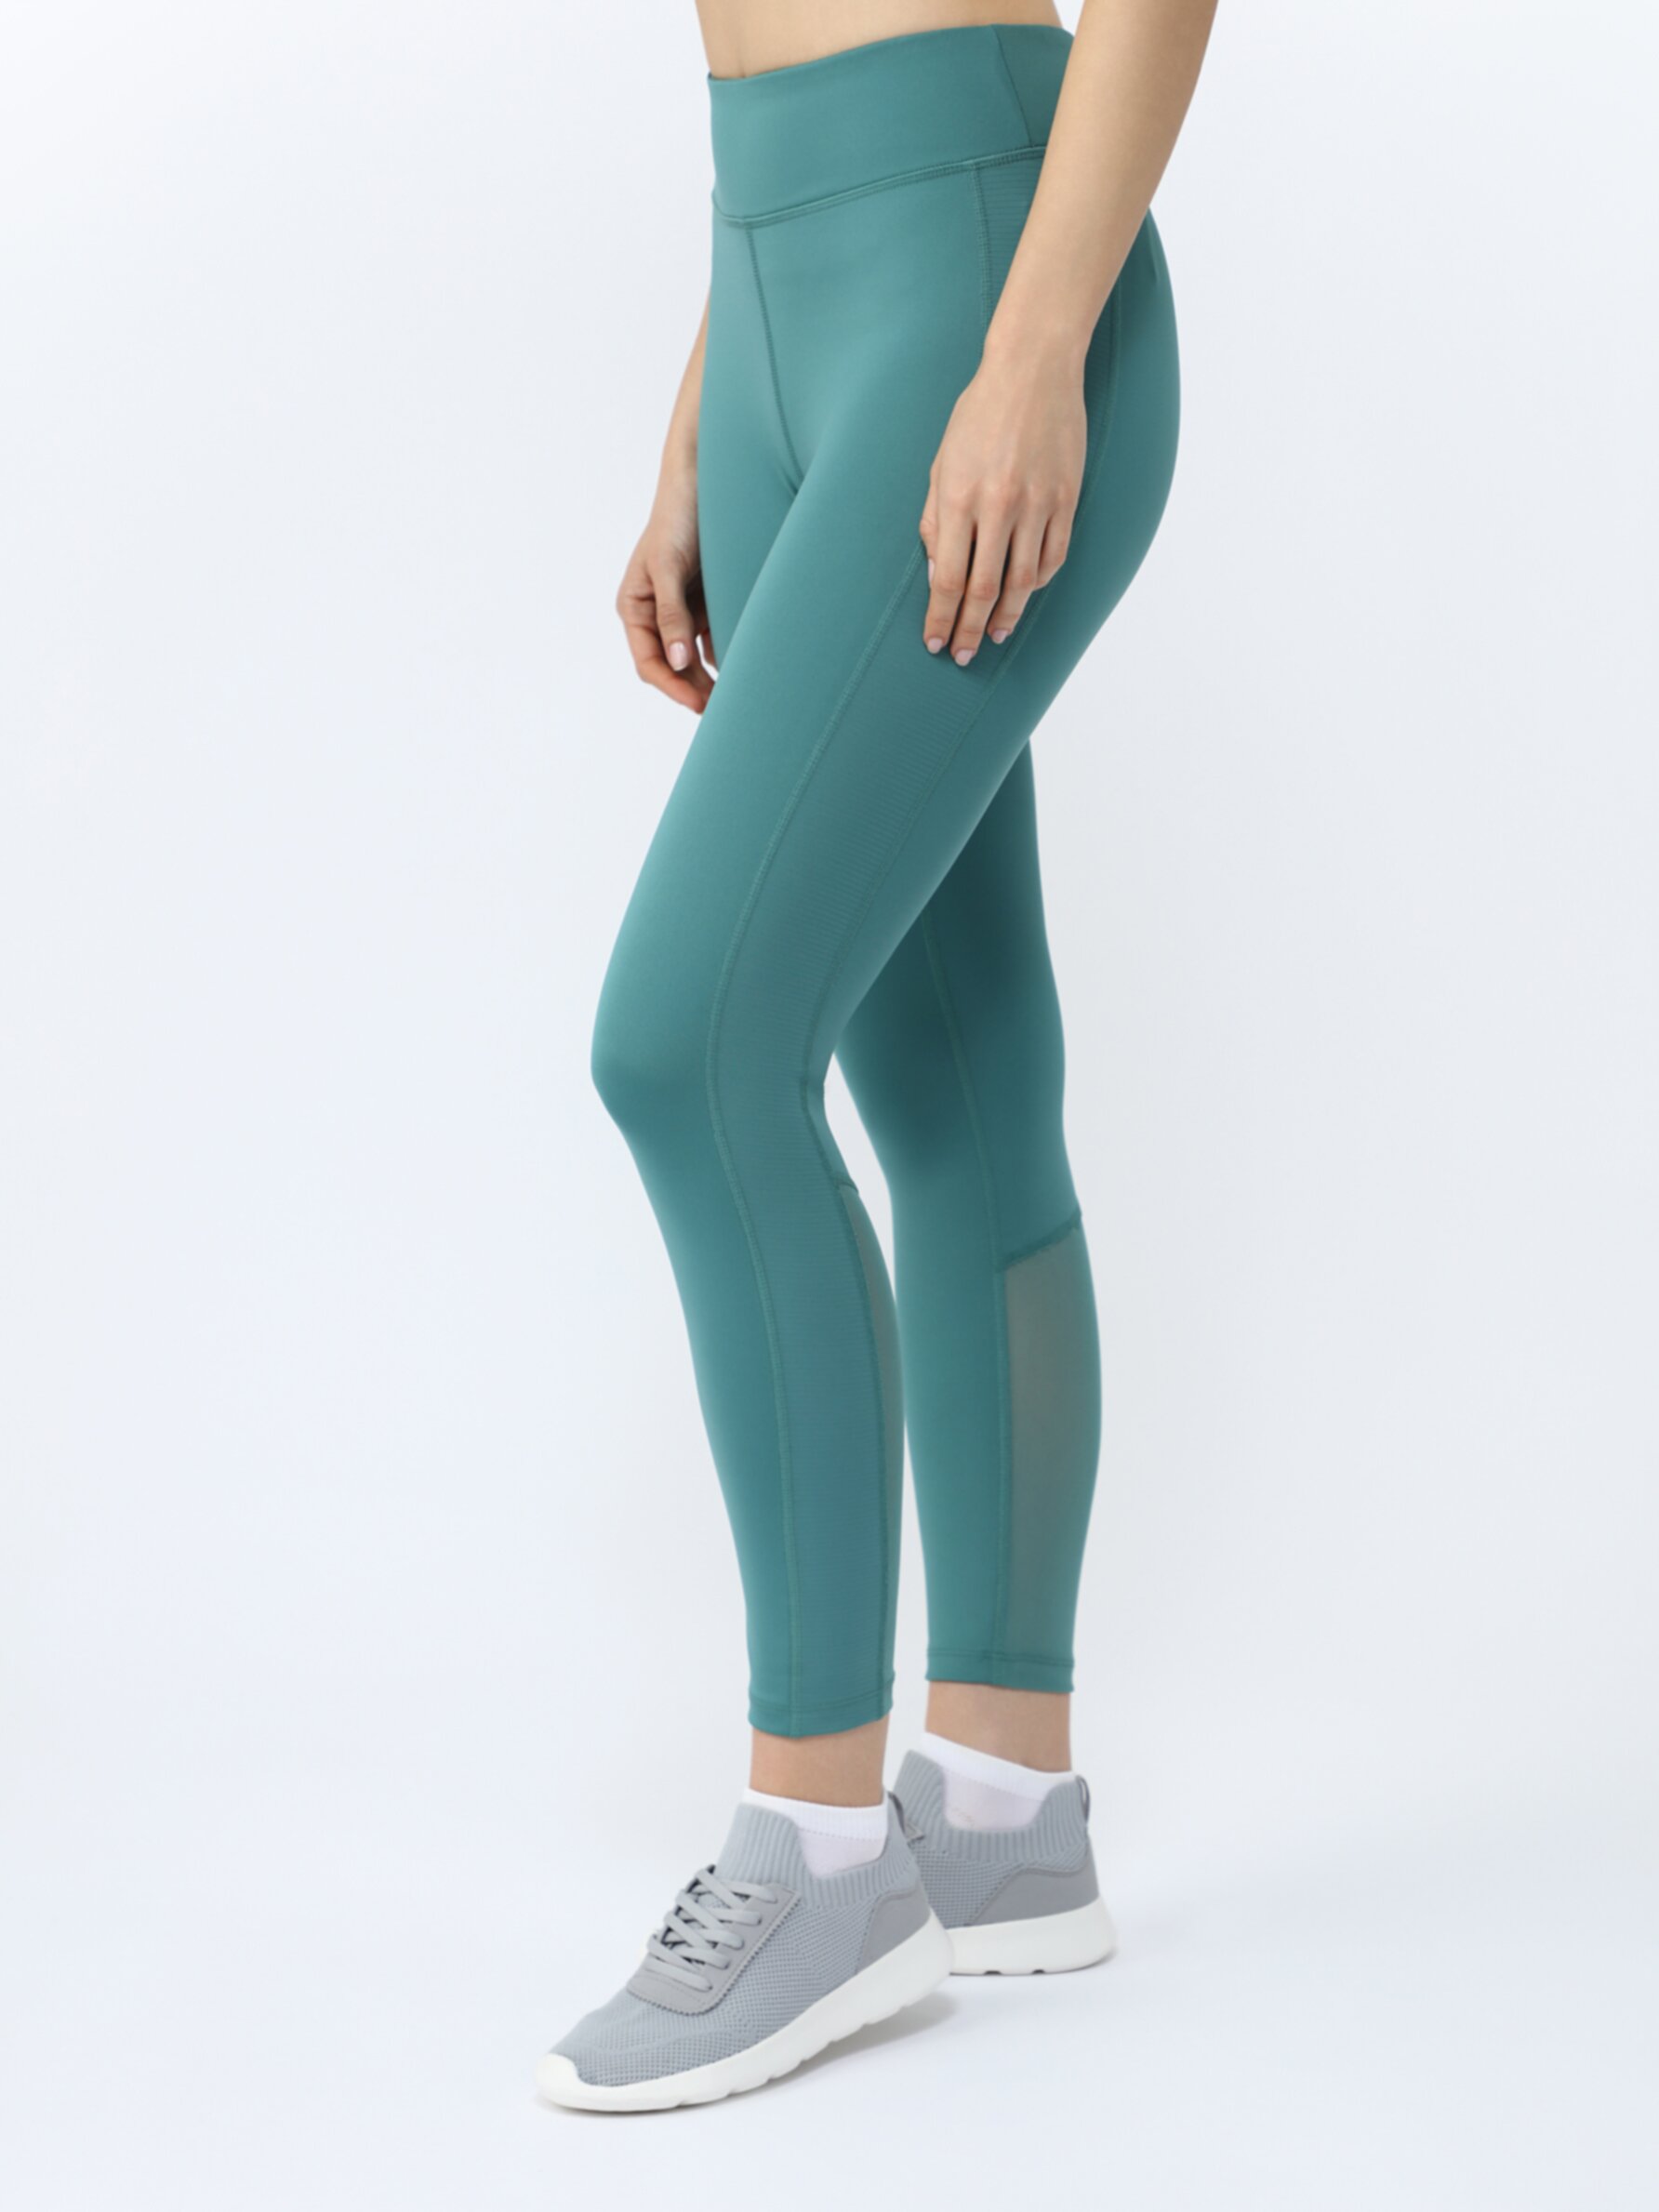 Legging Ropa Deportiva - ROPA - Mujer - | Lefties Mexico